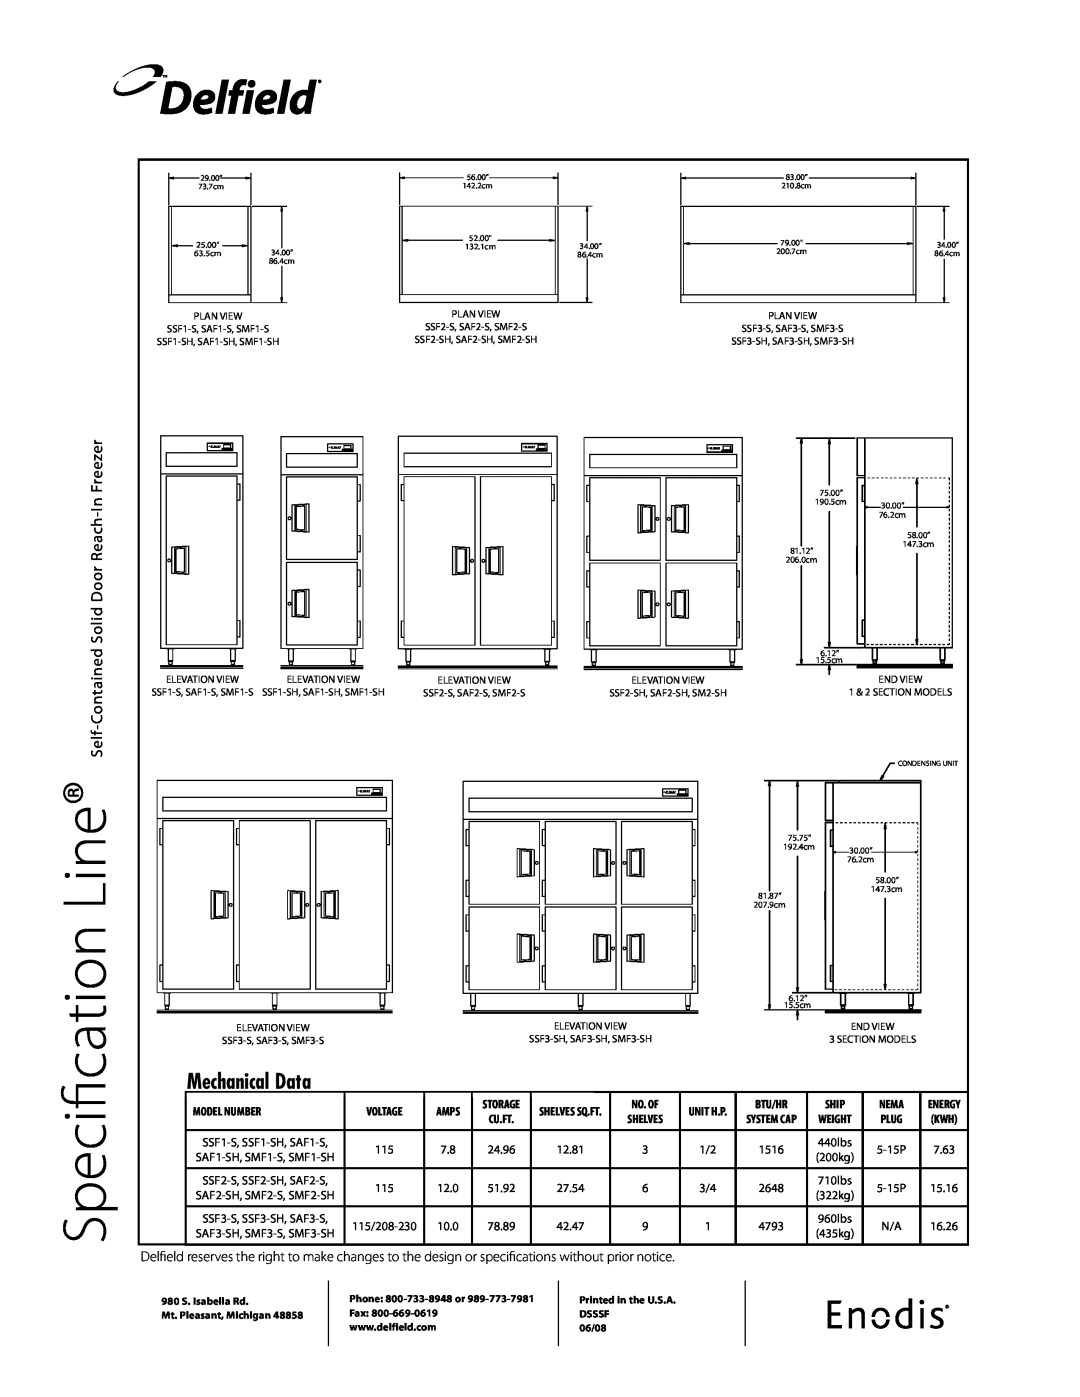 Delfield SSF-S Freezer, Solid Door, Self-Contained, Line, Specification, Delfield, Mechanical Data, Reach, Model Number 